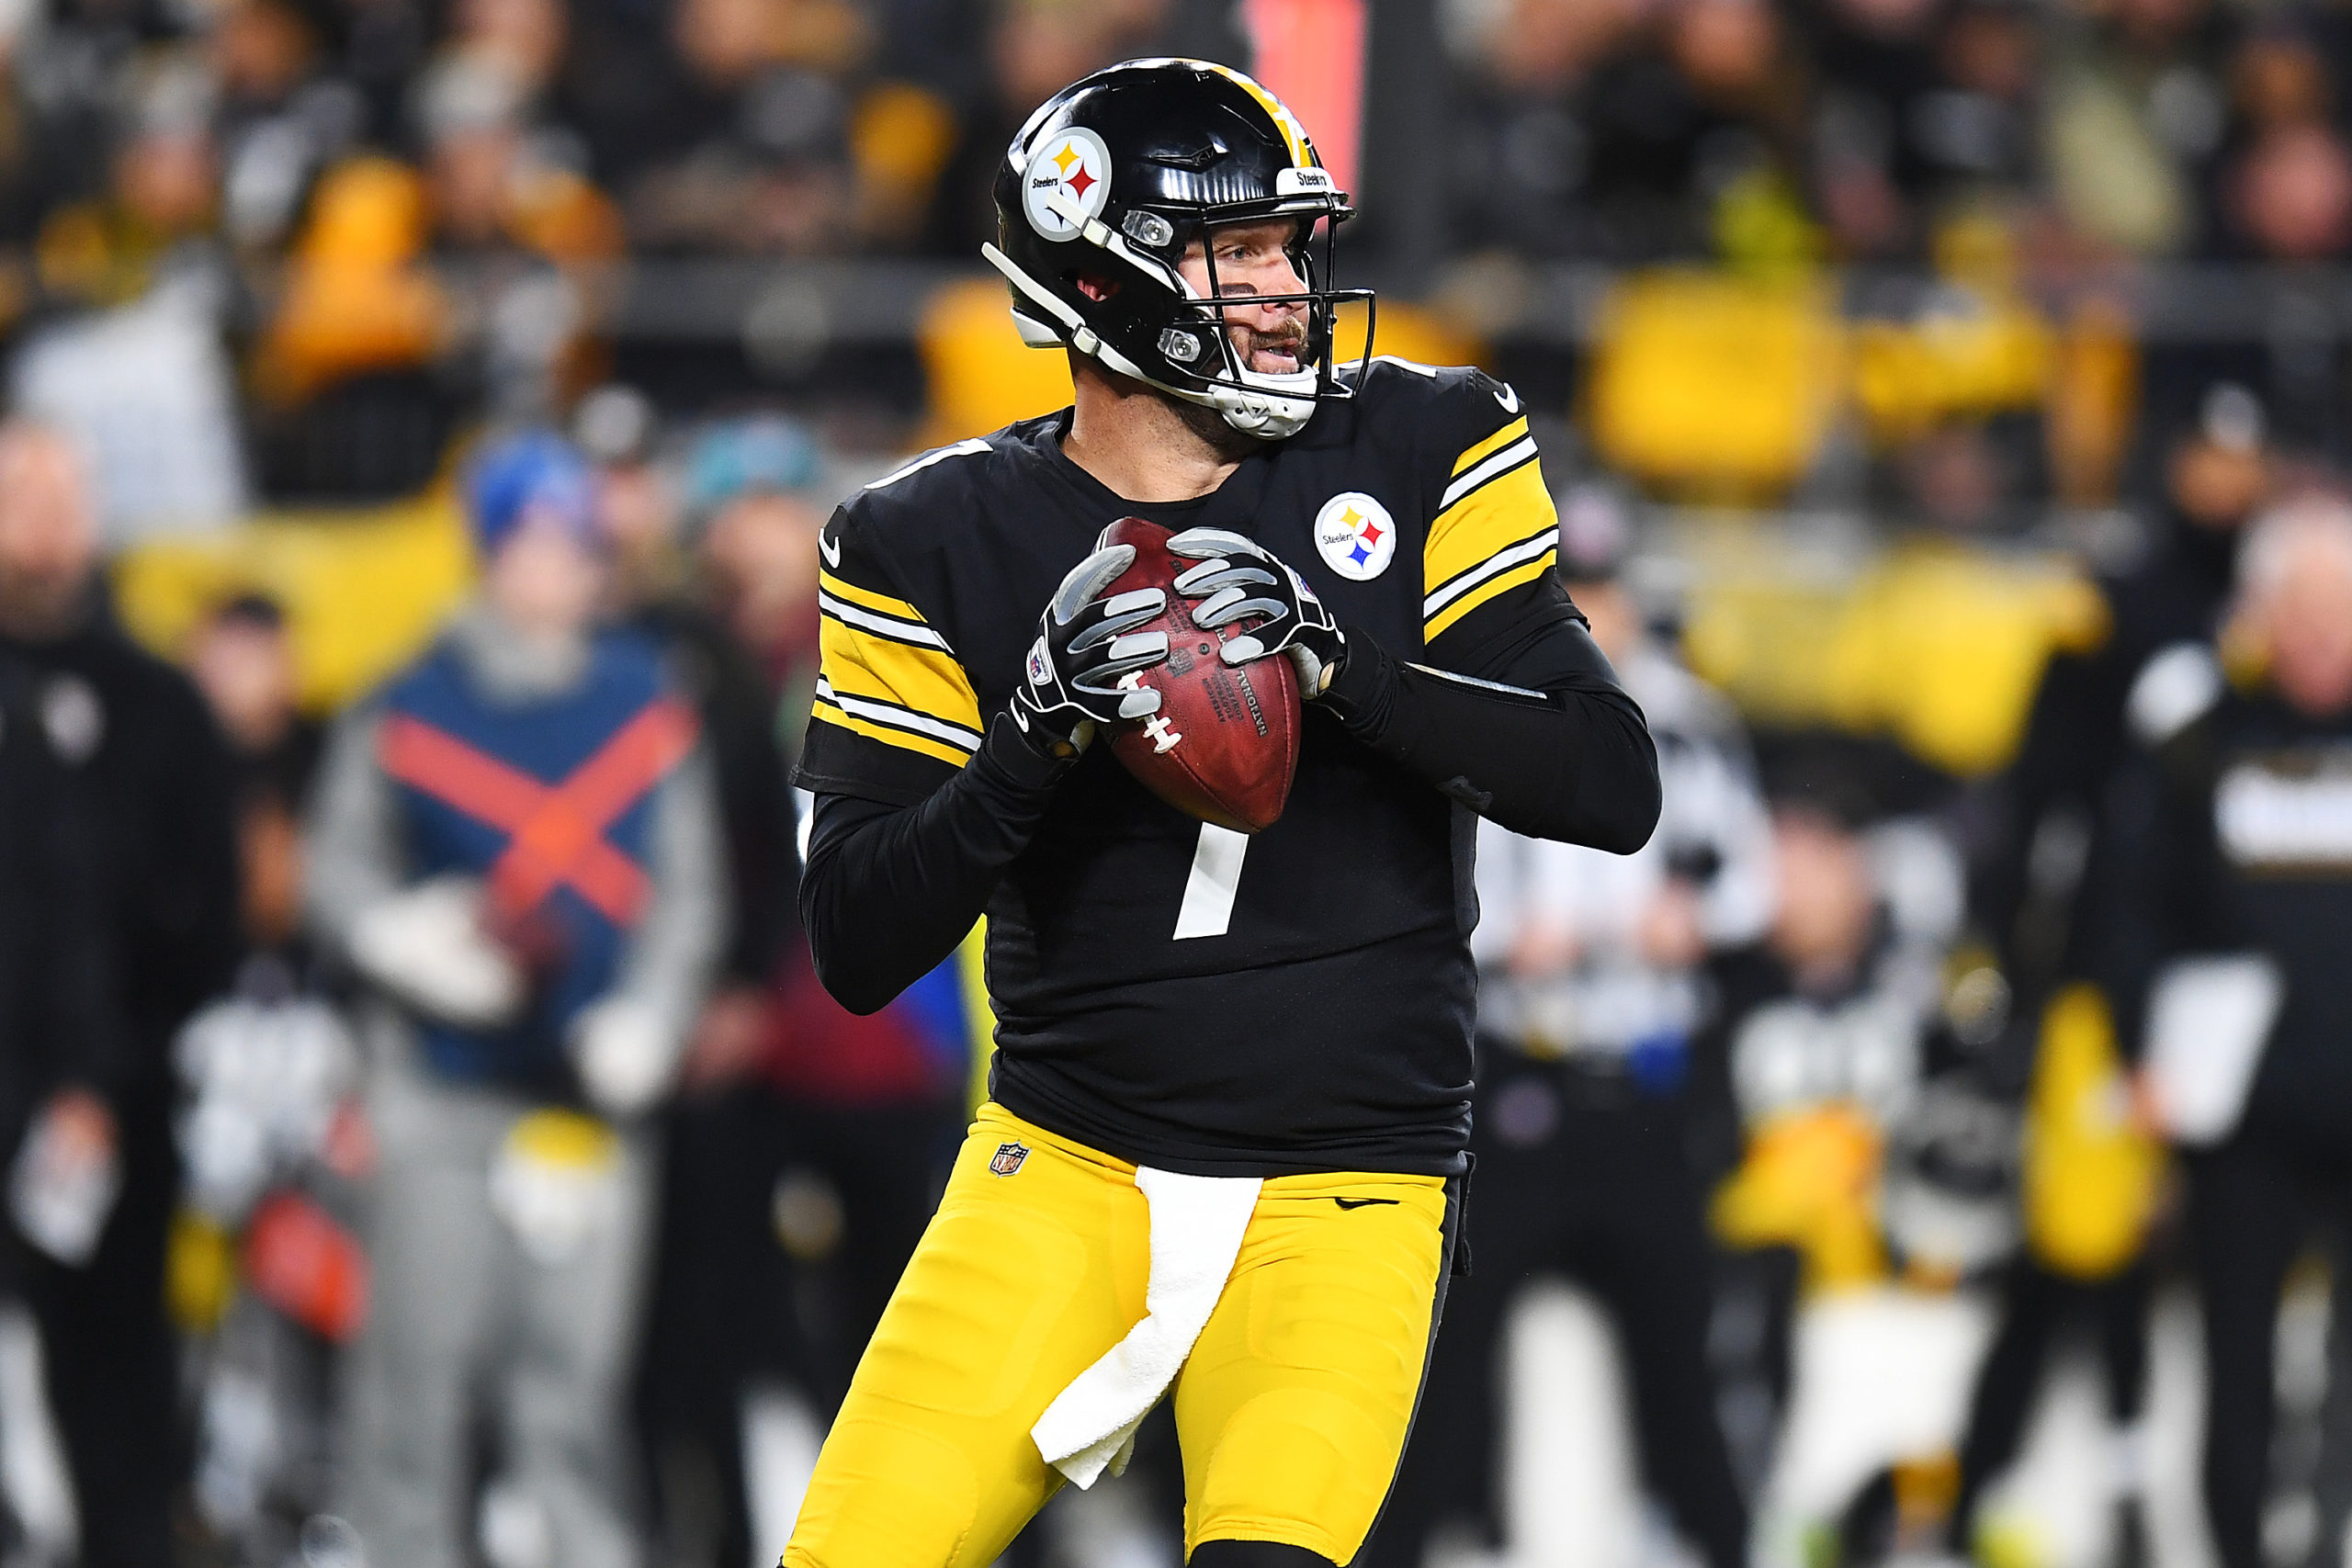 PITTSBURGH, PENNSYLVANIA - DECEMBER 05: Ben Roethlisberger #7 of the Pittsburgh Steelers looks to pass against the Baltimore Ravens during the second quarter at Heinz Field on December 05, 2021 in Pittsburgh, Pennsylvania. (Photo by Joe Sargent/Getty Images)